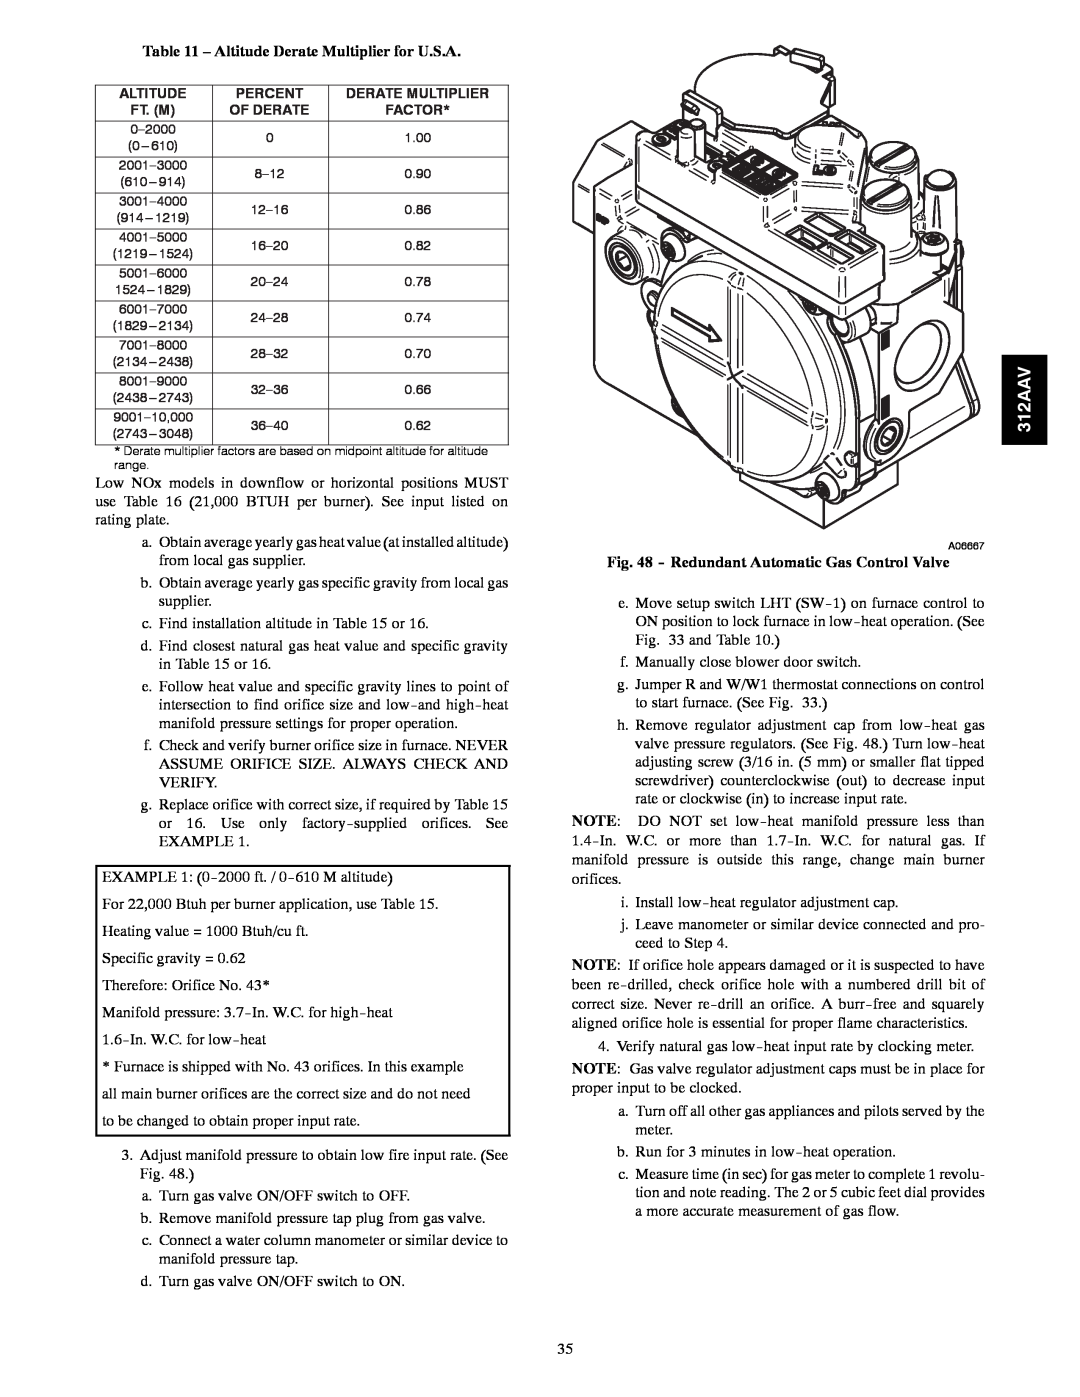 Bryant 312AAV/JAV instruction manual Altitude Derate Multiplier for U.S.A, Redundant Automatic Gas Control Valve 